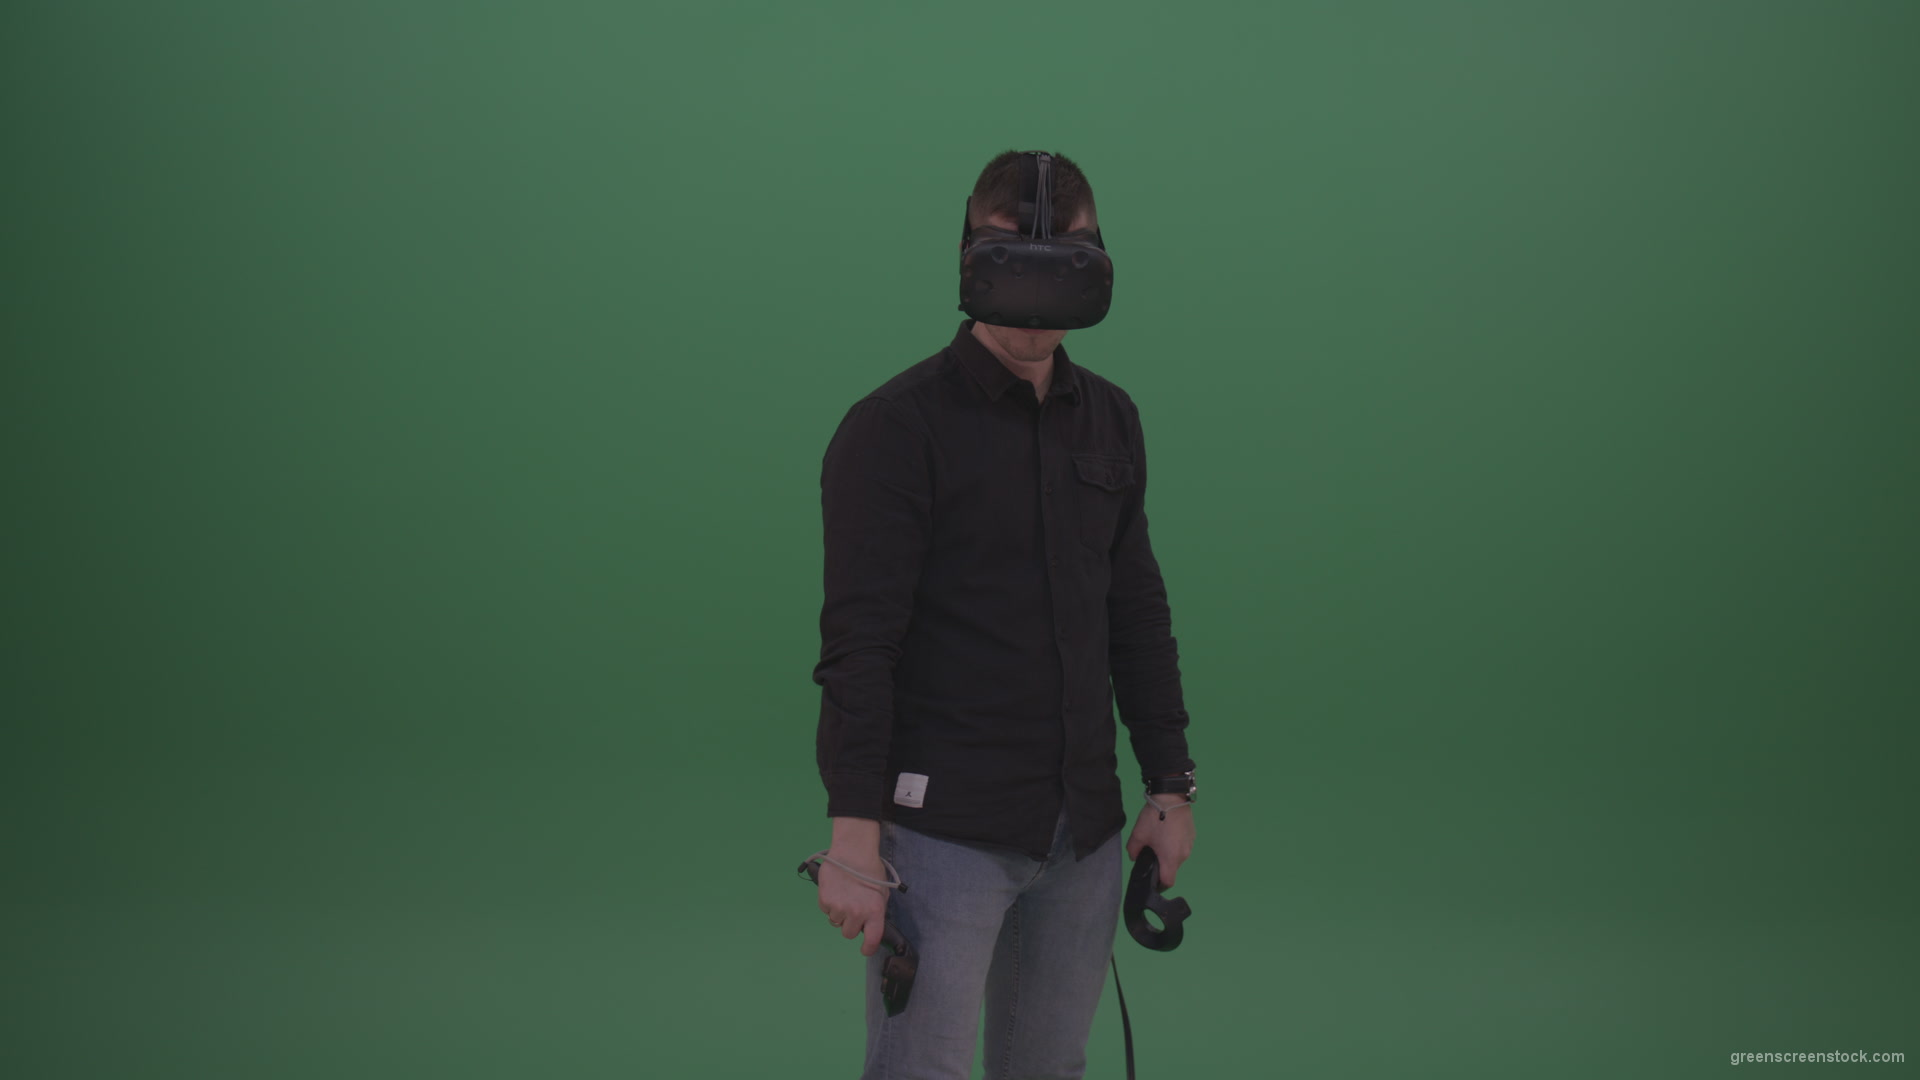 Young_Dangerous_Brunette_Man_Wearing_Black_Shirt_Shooting_Enemies_All_Around_In_Virtual_Reality_Glasses_Green_Screen_Wall_Background_001 Green Screen Stock